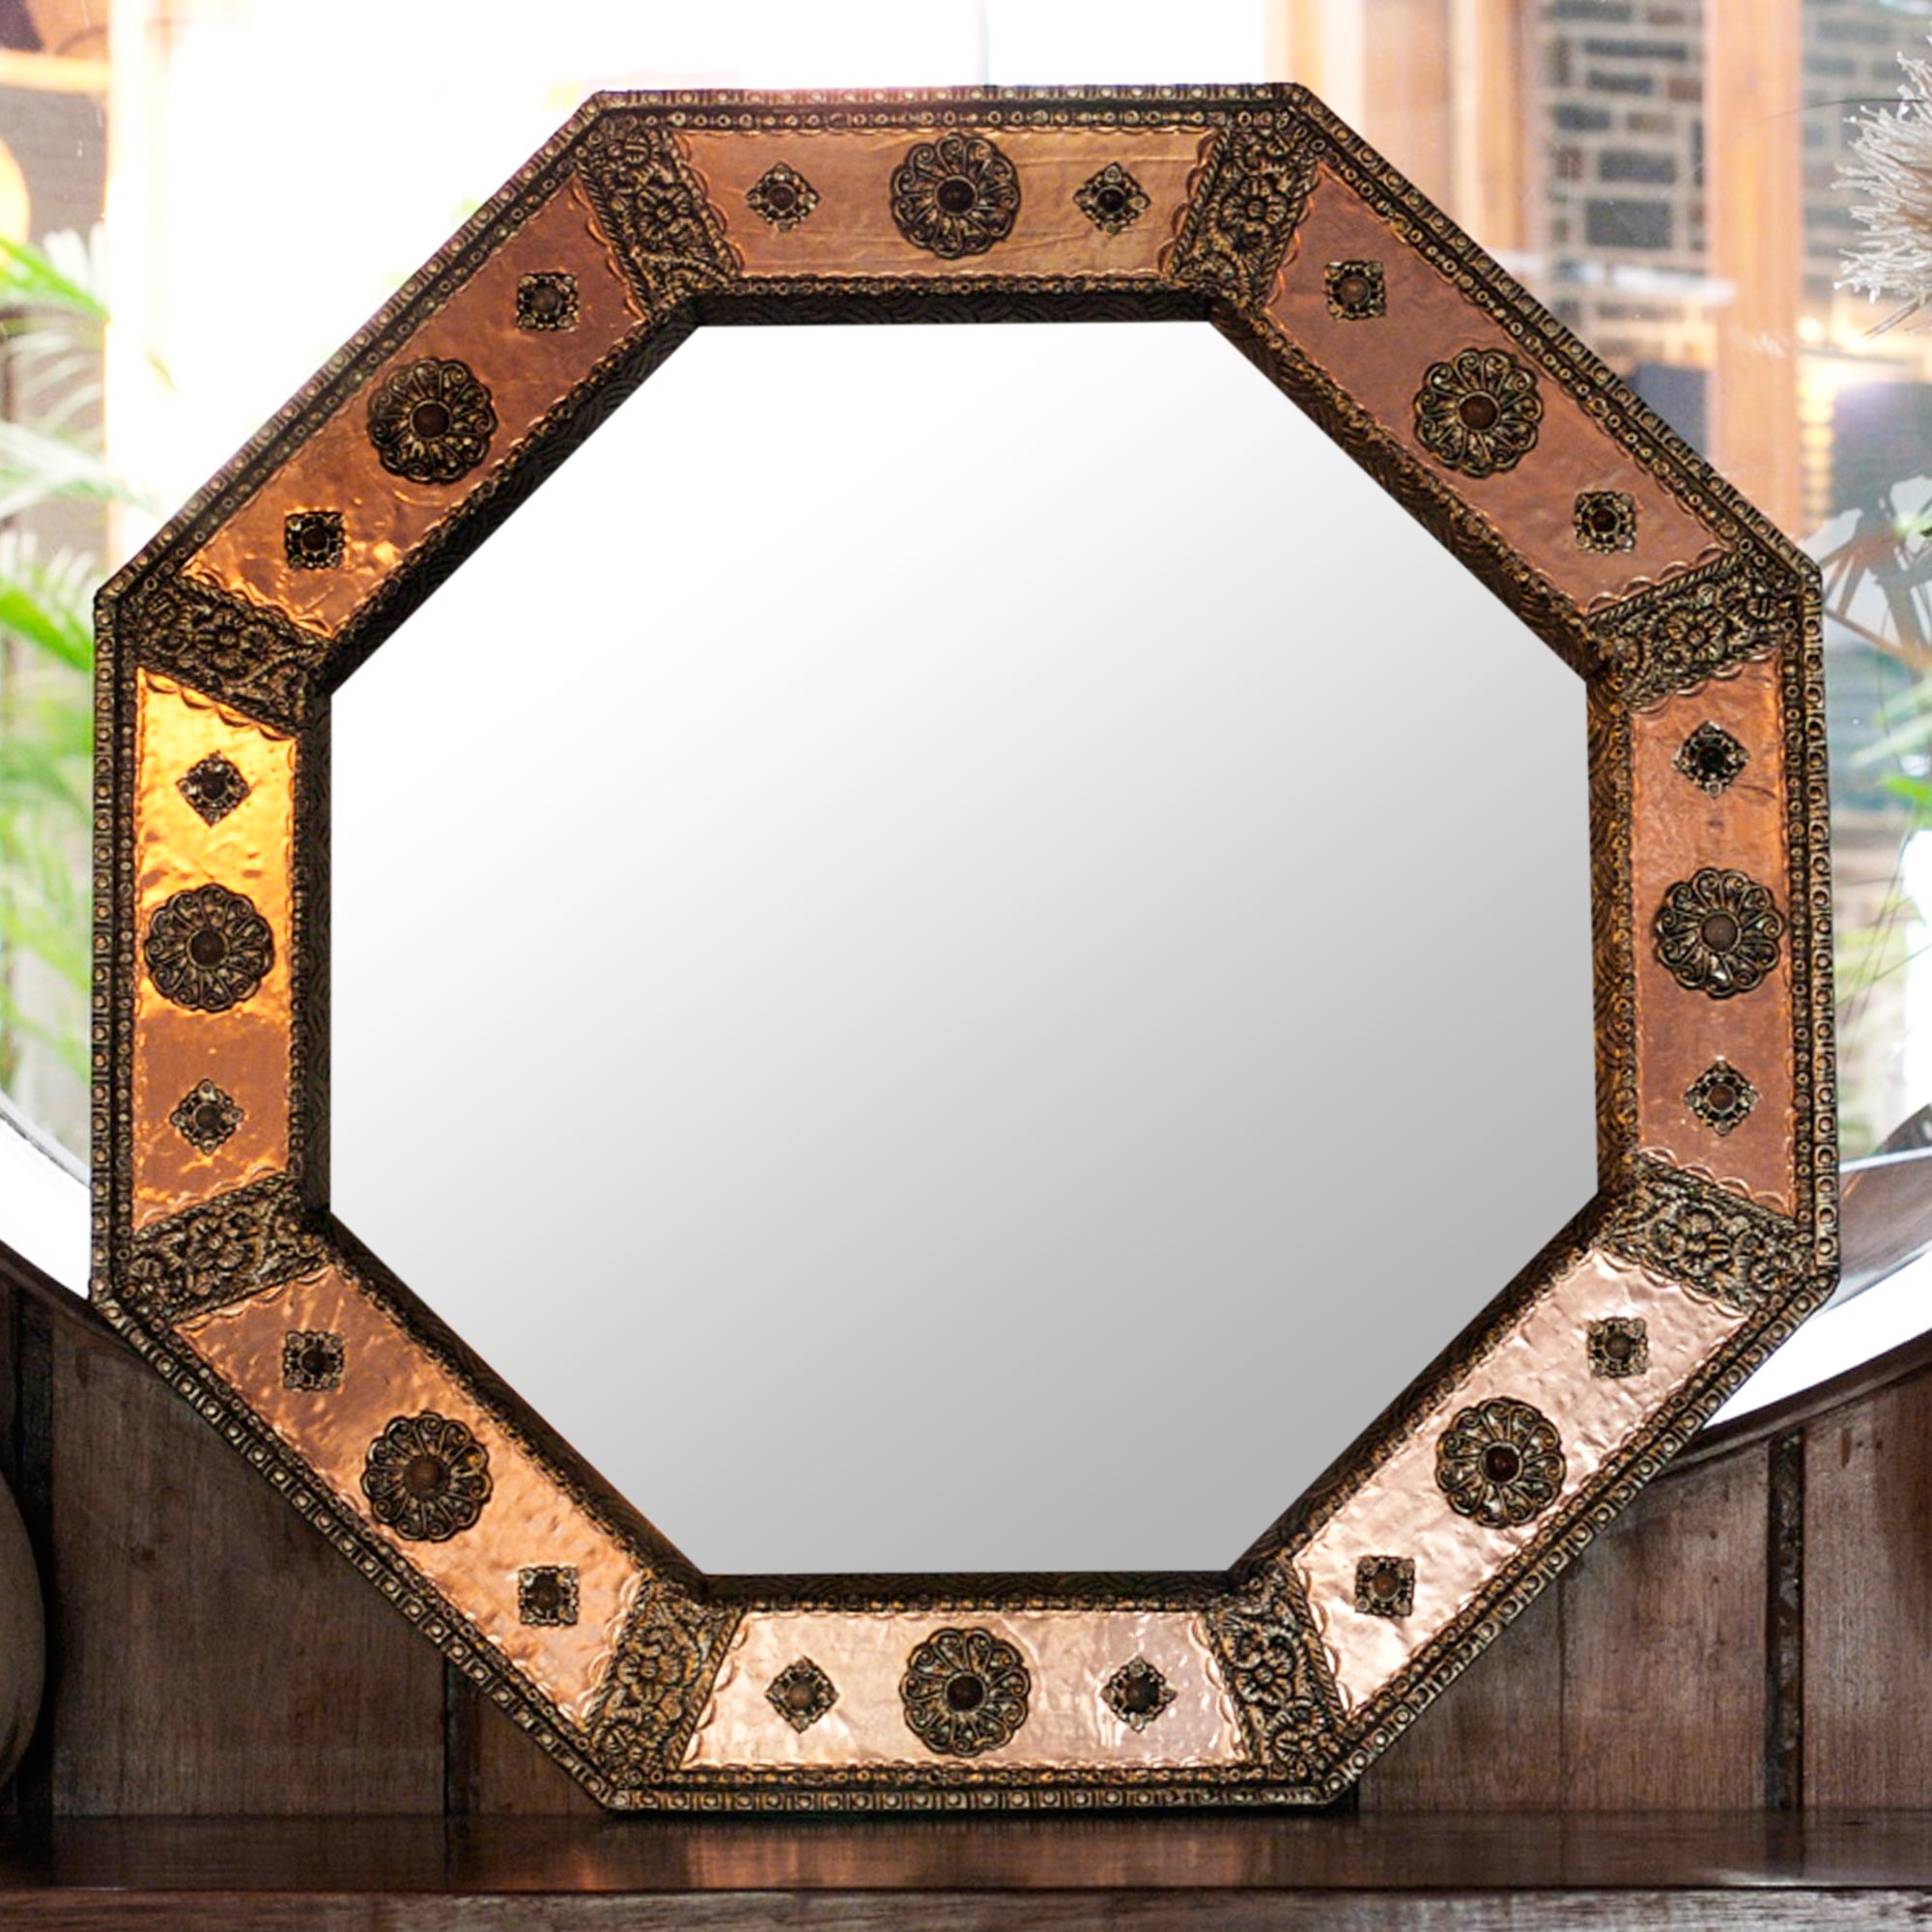 Copper Mirror Handmade in India, 'Mystery of India Mirror' Choosing a statement mirror